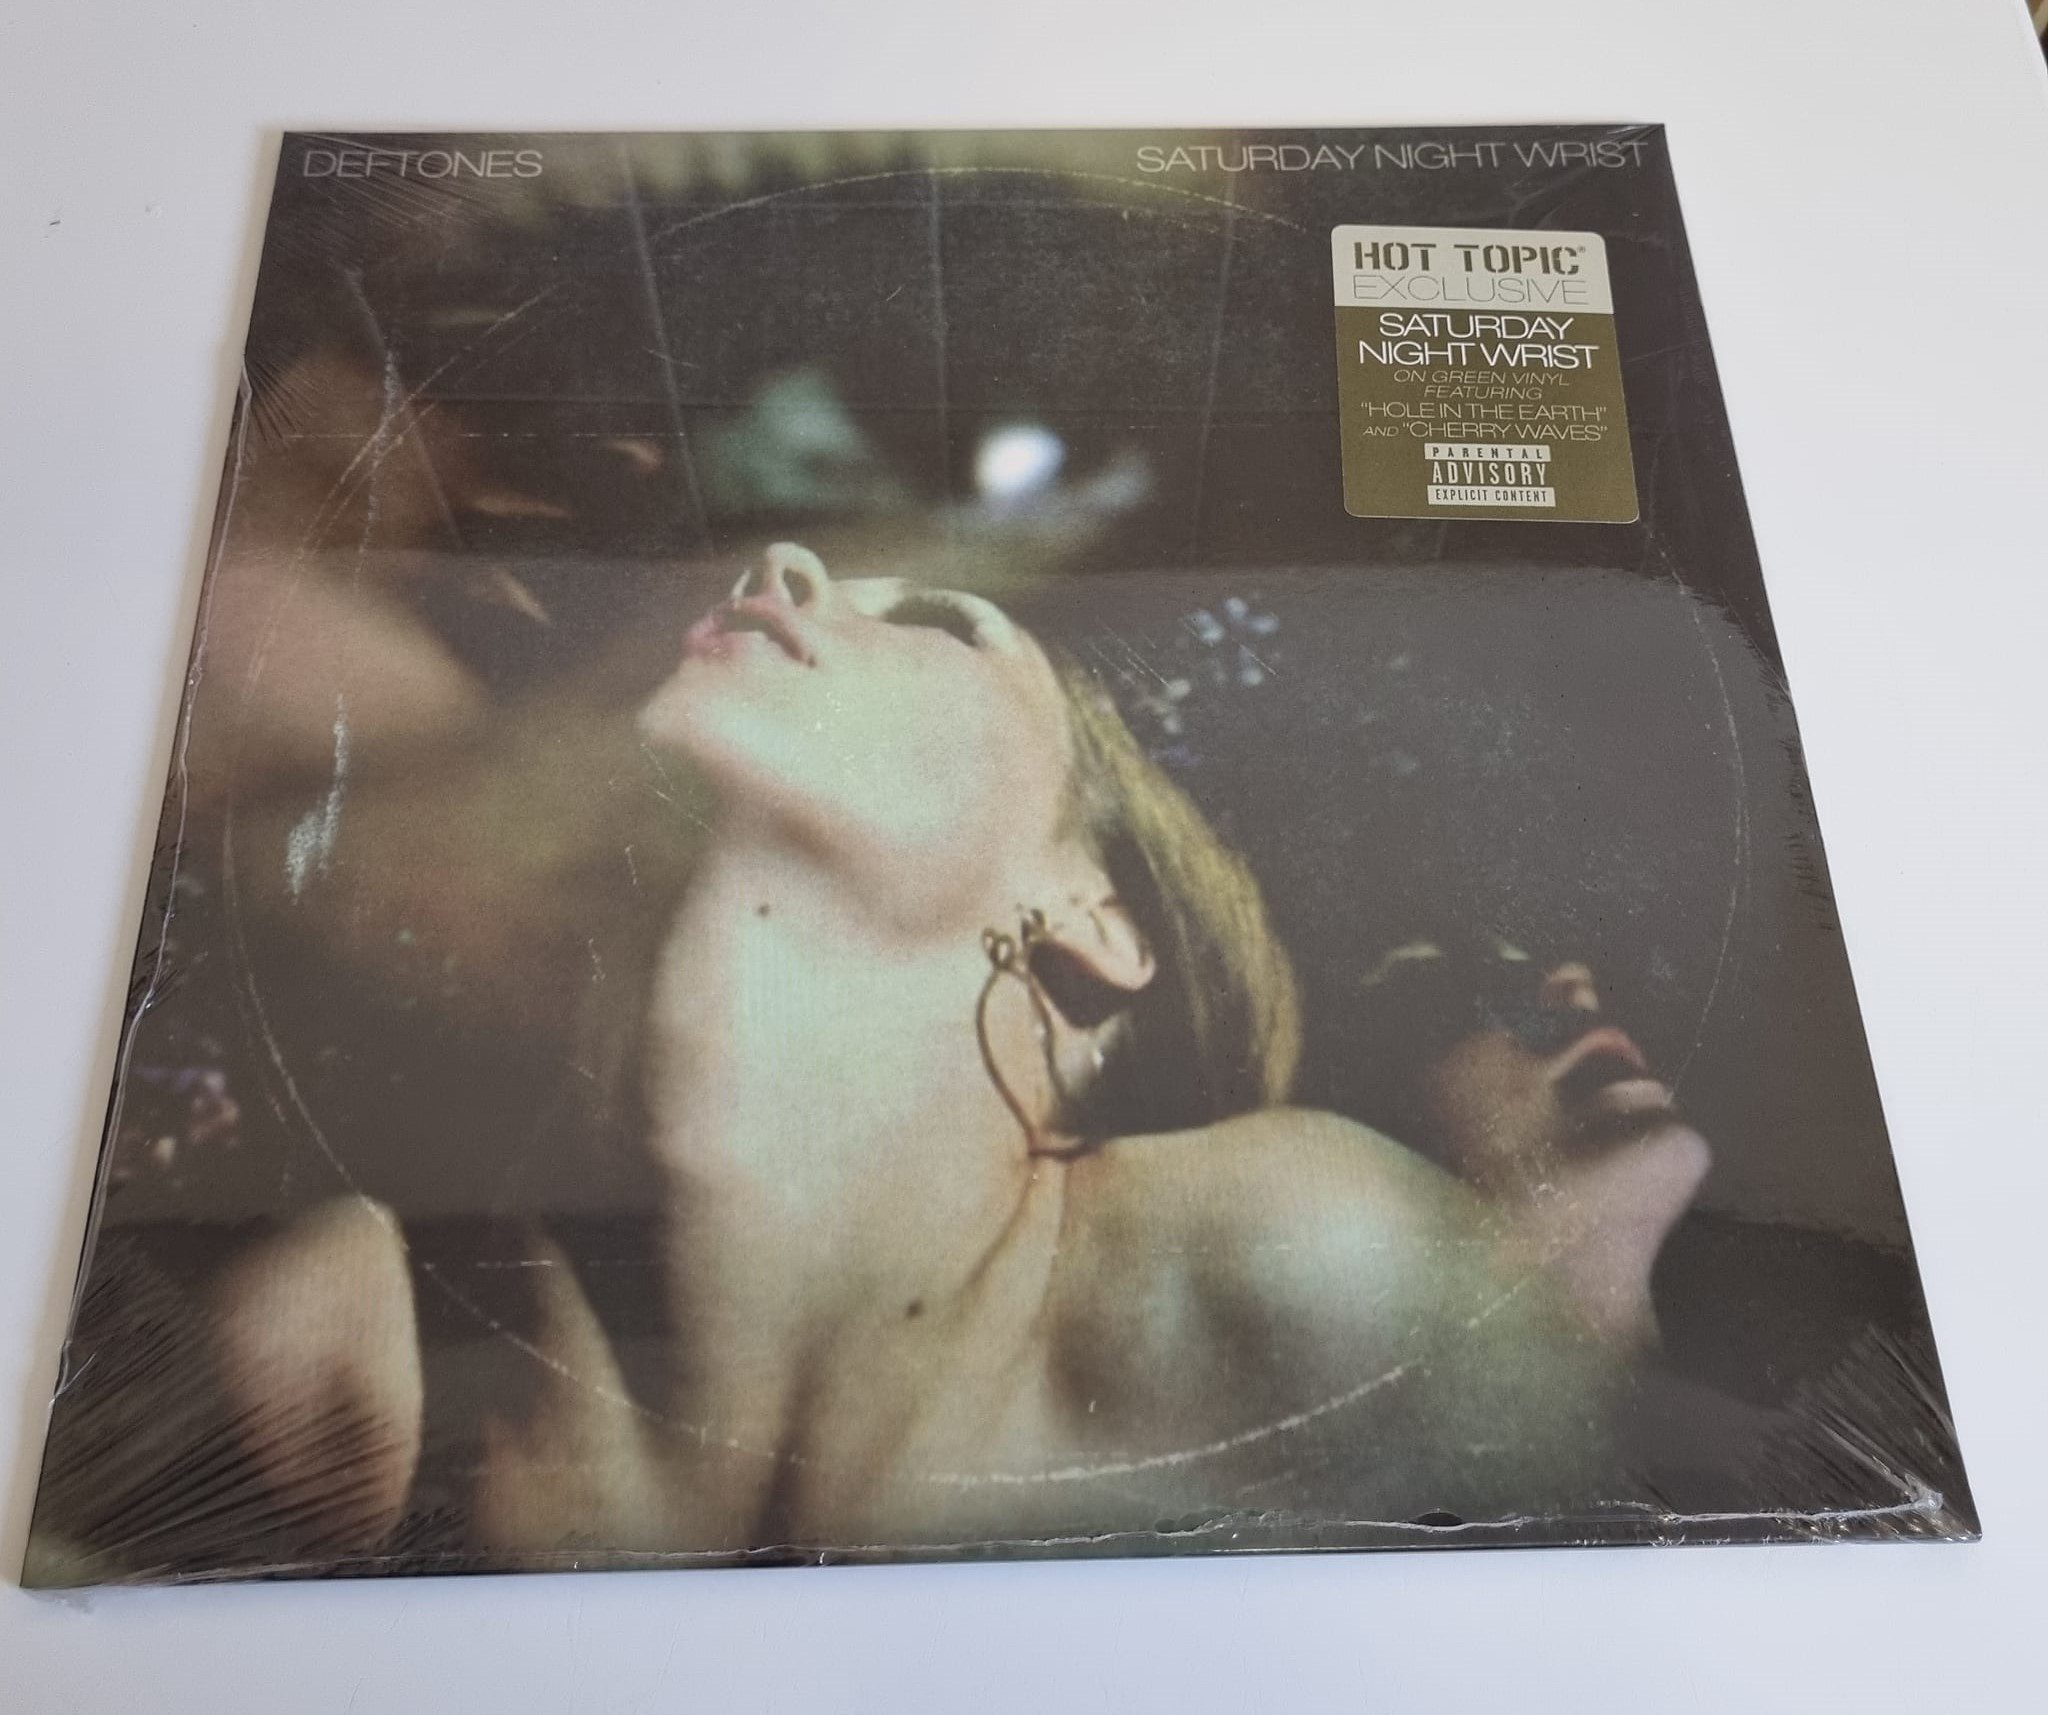 Buy this rare Deftones record by clicking here